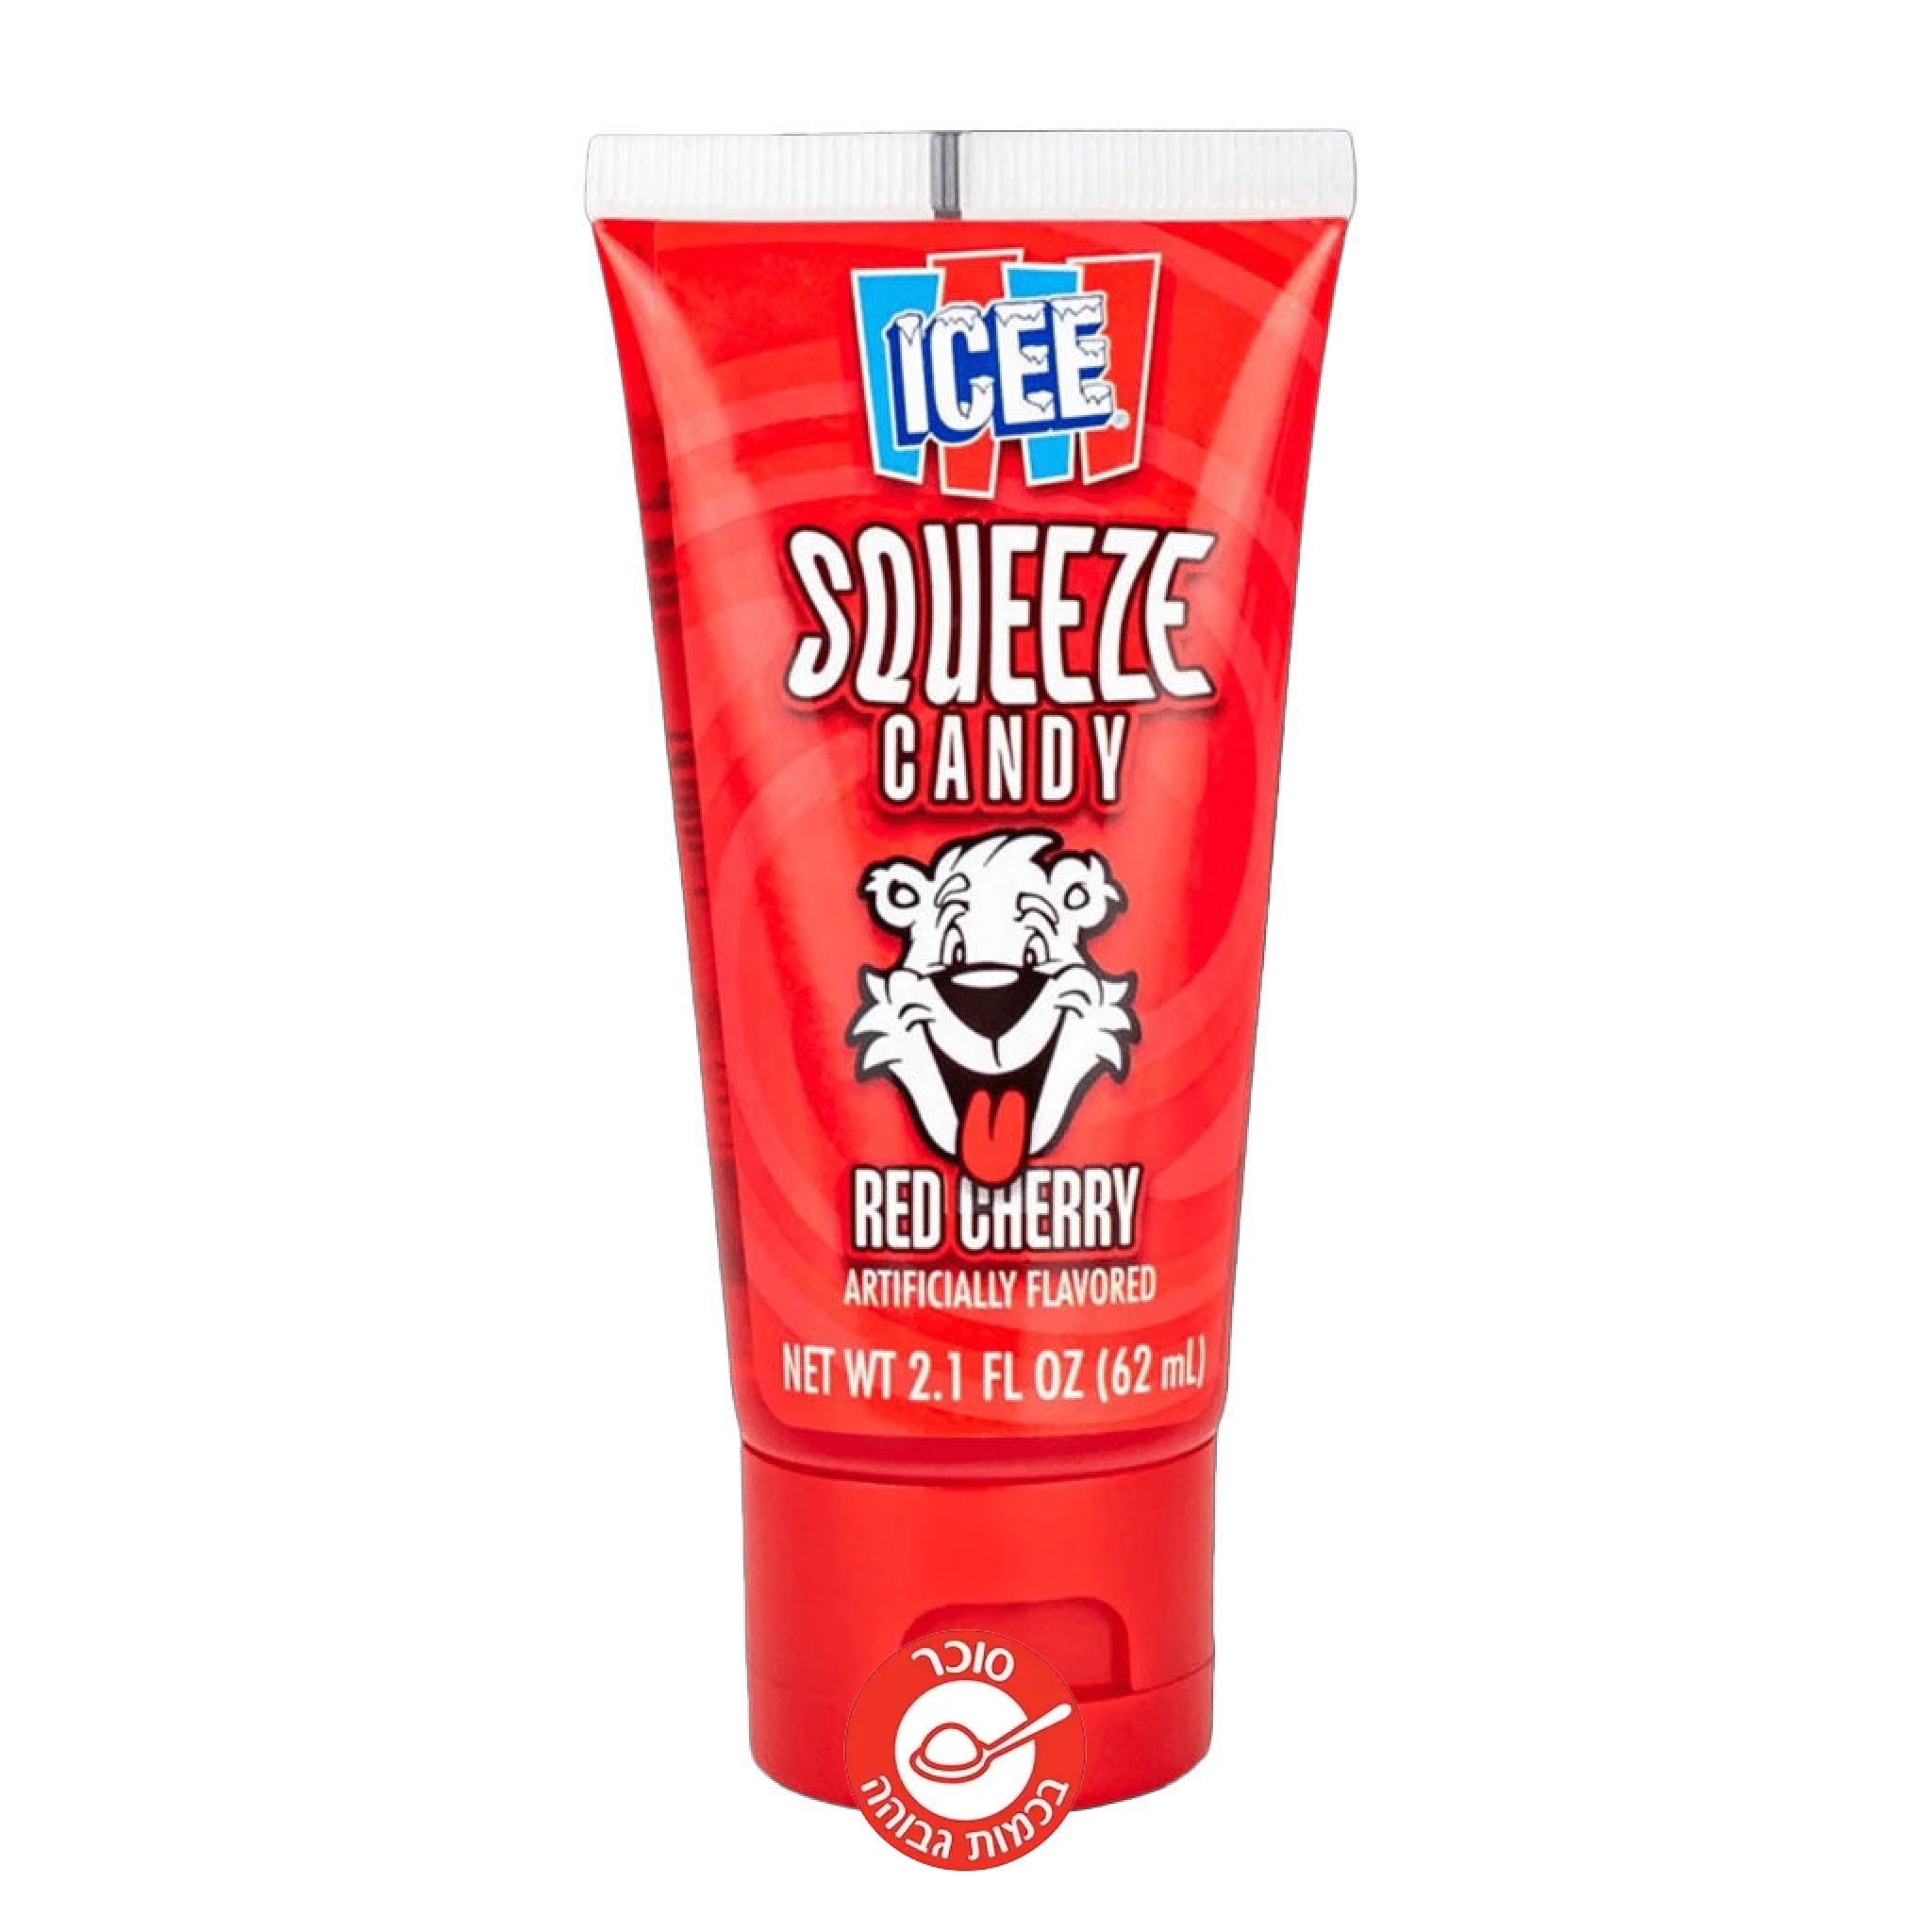 Icee Squeeze Candy Red Cherry אייסי דובדבן אדום בשפורפרת